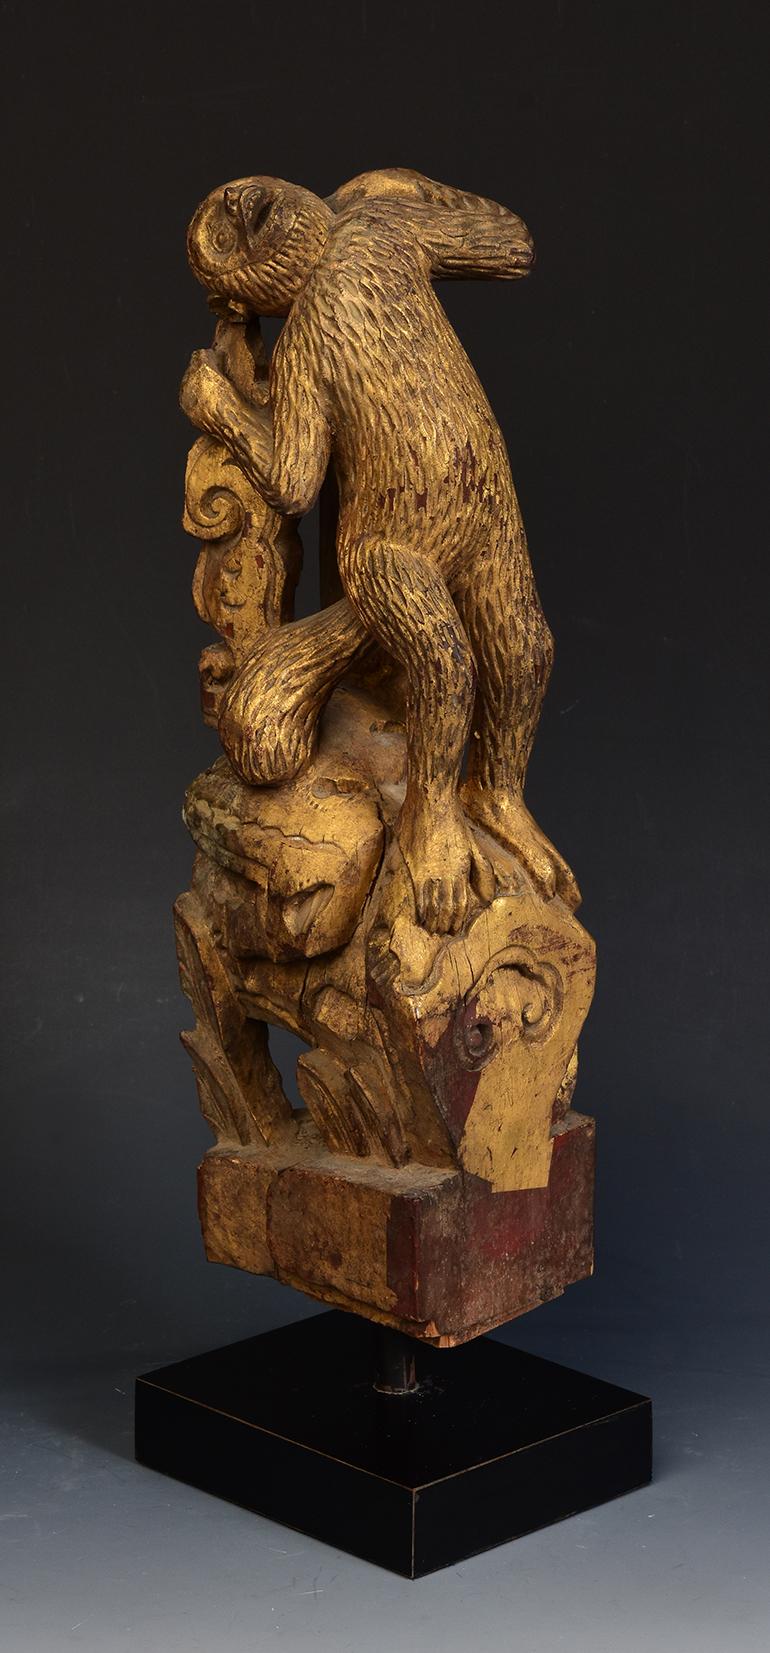 Chinese wooden monkey with gilded gold.

Age: China, Qing Dynasty, 19th Century
Size: height 33.5 cm / width 8.3 cm / thickness 10.8 cm.
Size including stand: height 40 cm.
Condition: Nice condition overall (some expected degradation due to its age